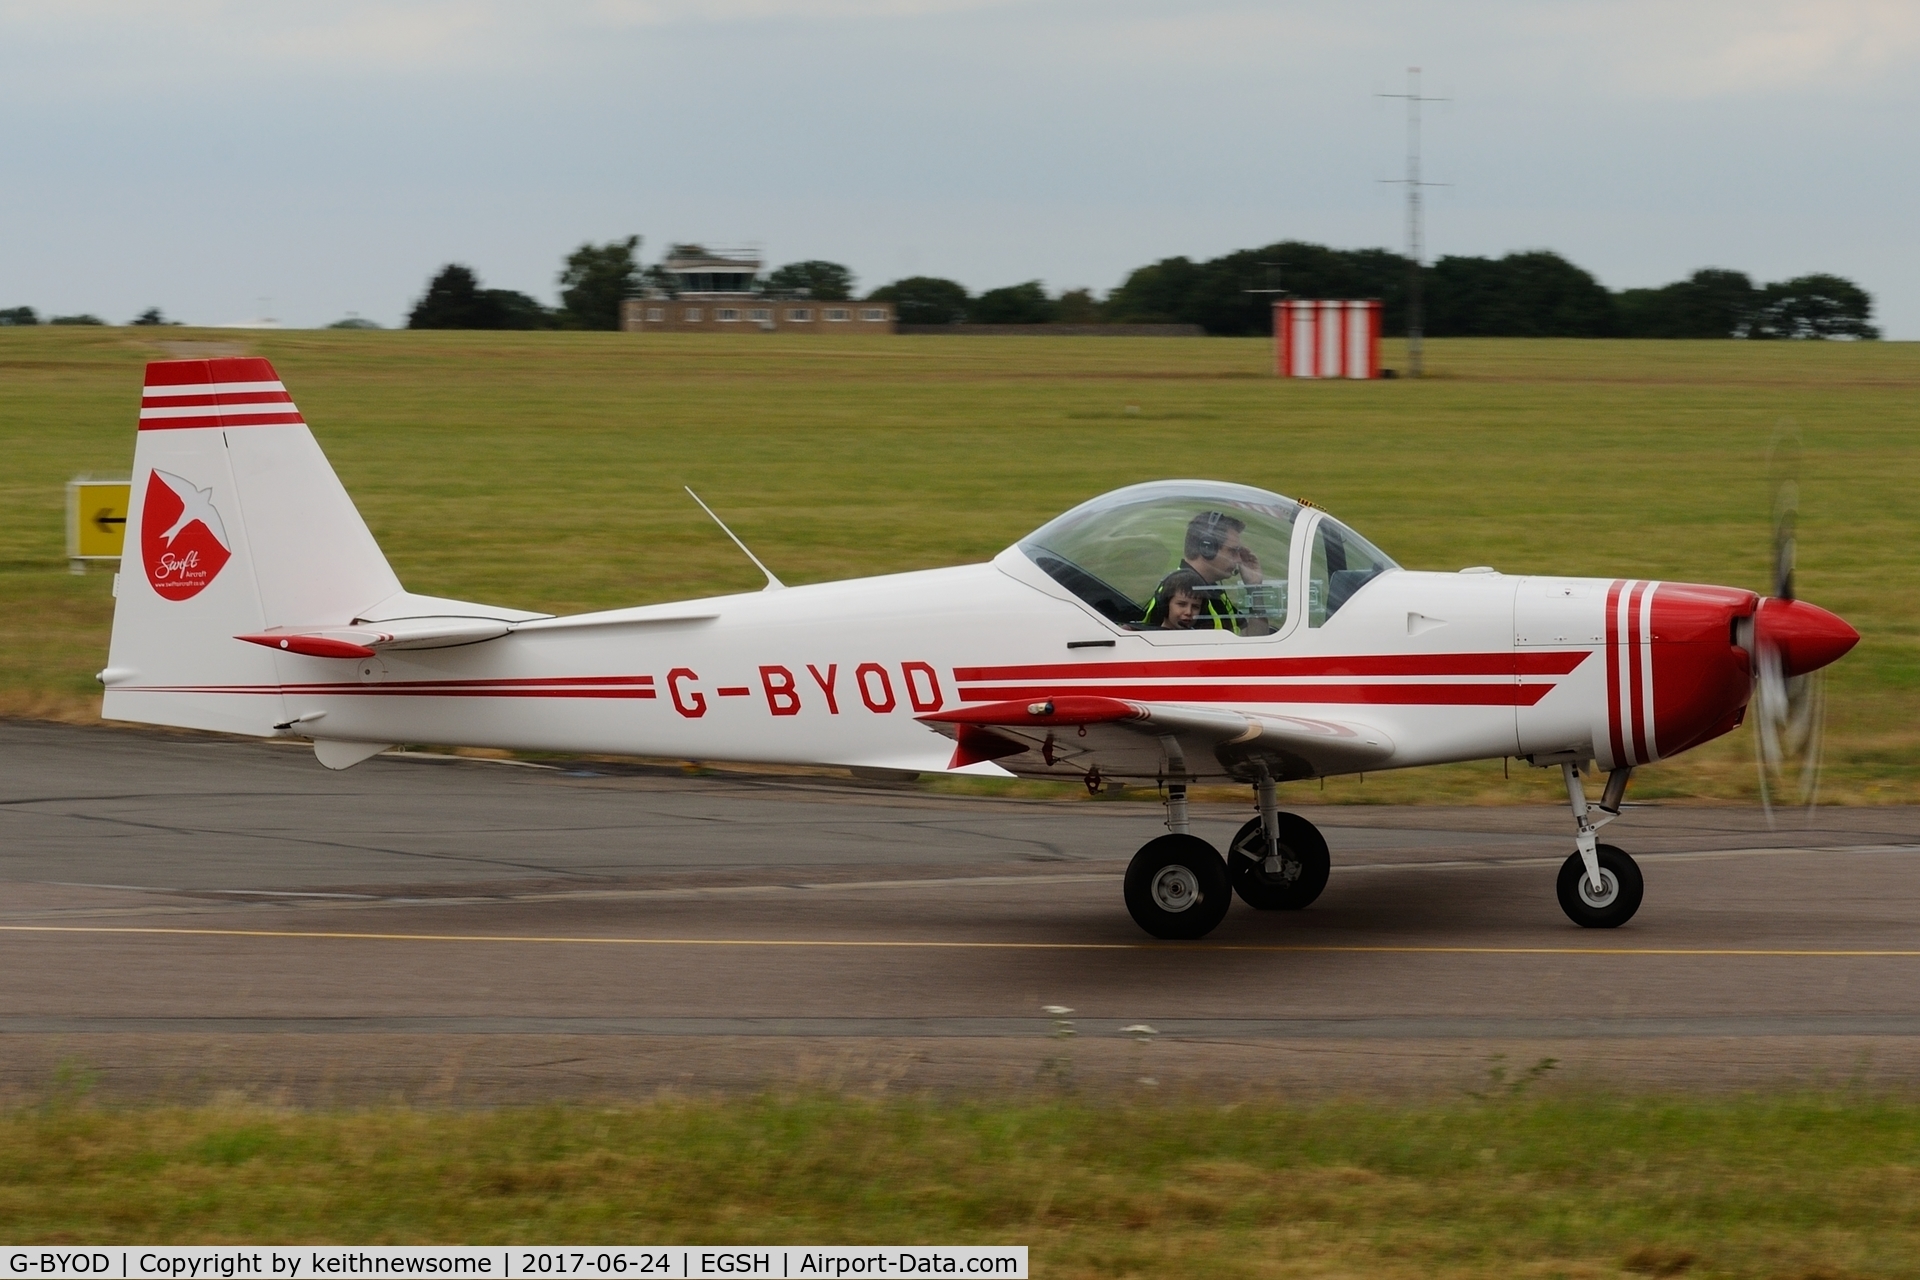 G-BYOD, 2001 Slingsby T-67M-200 Firefly C/N 2265, Leaving following fuel stop.